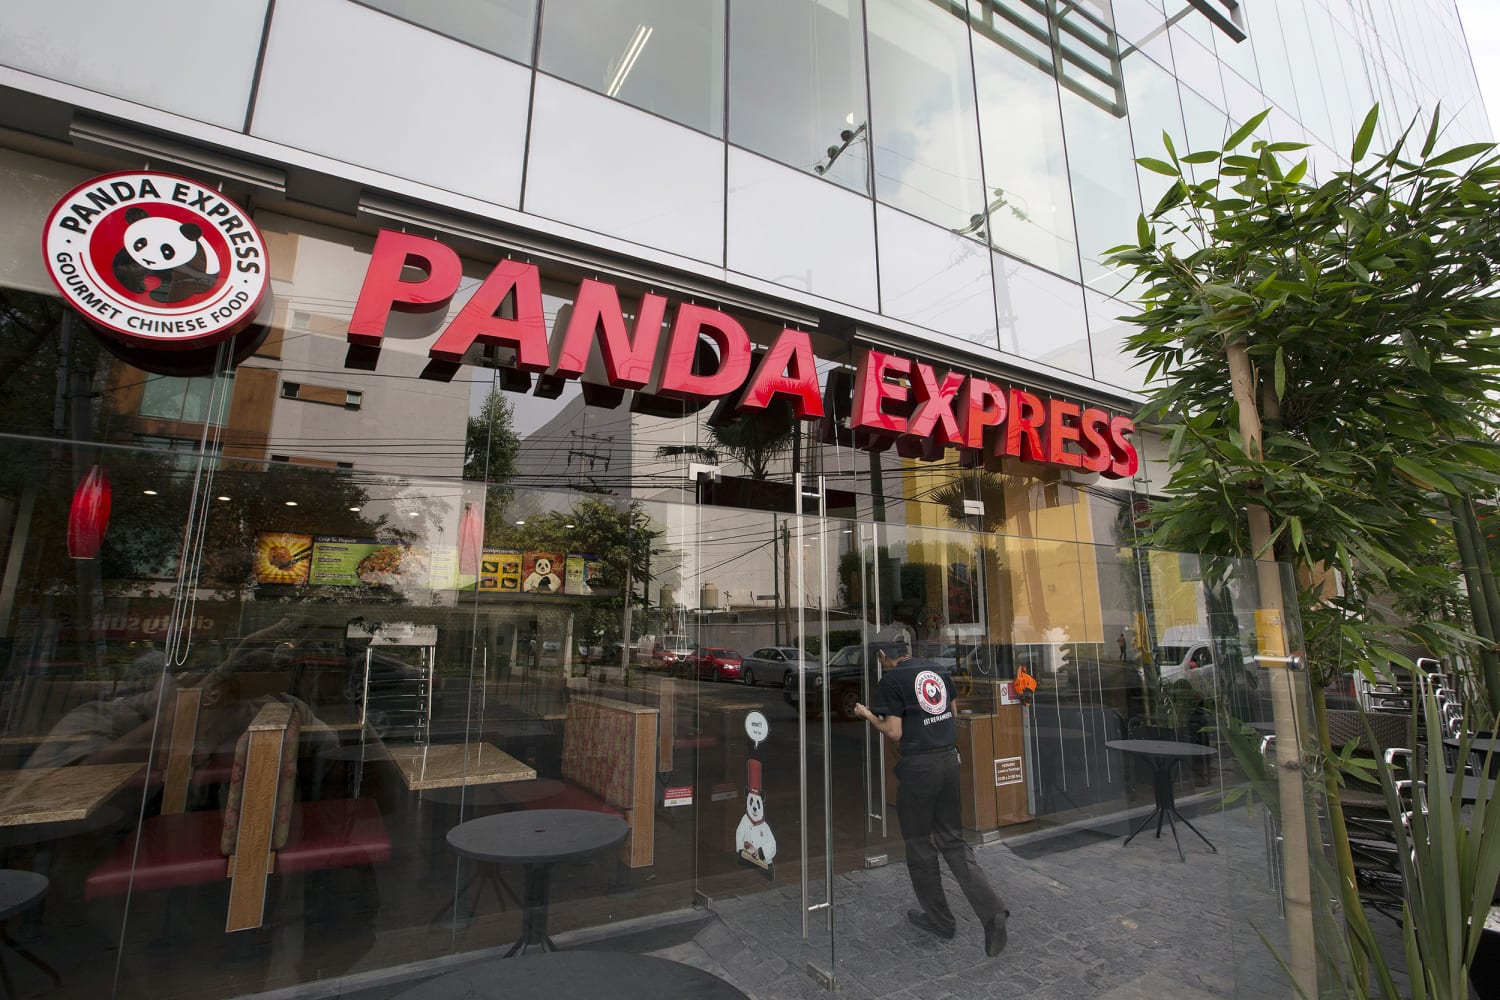 Panda Express employee forced to strip during trust-building exercise, lawsuit says pic